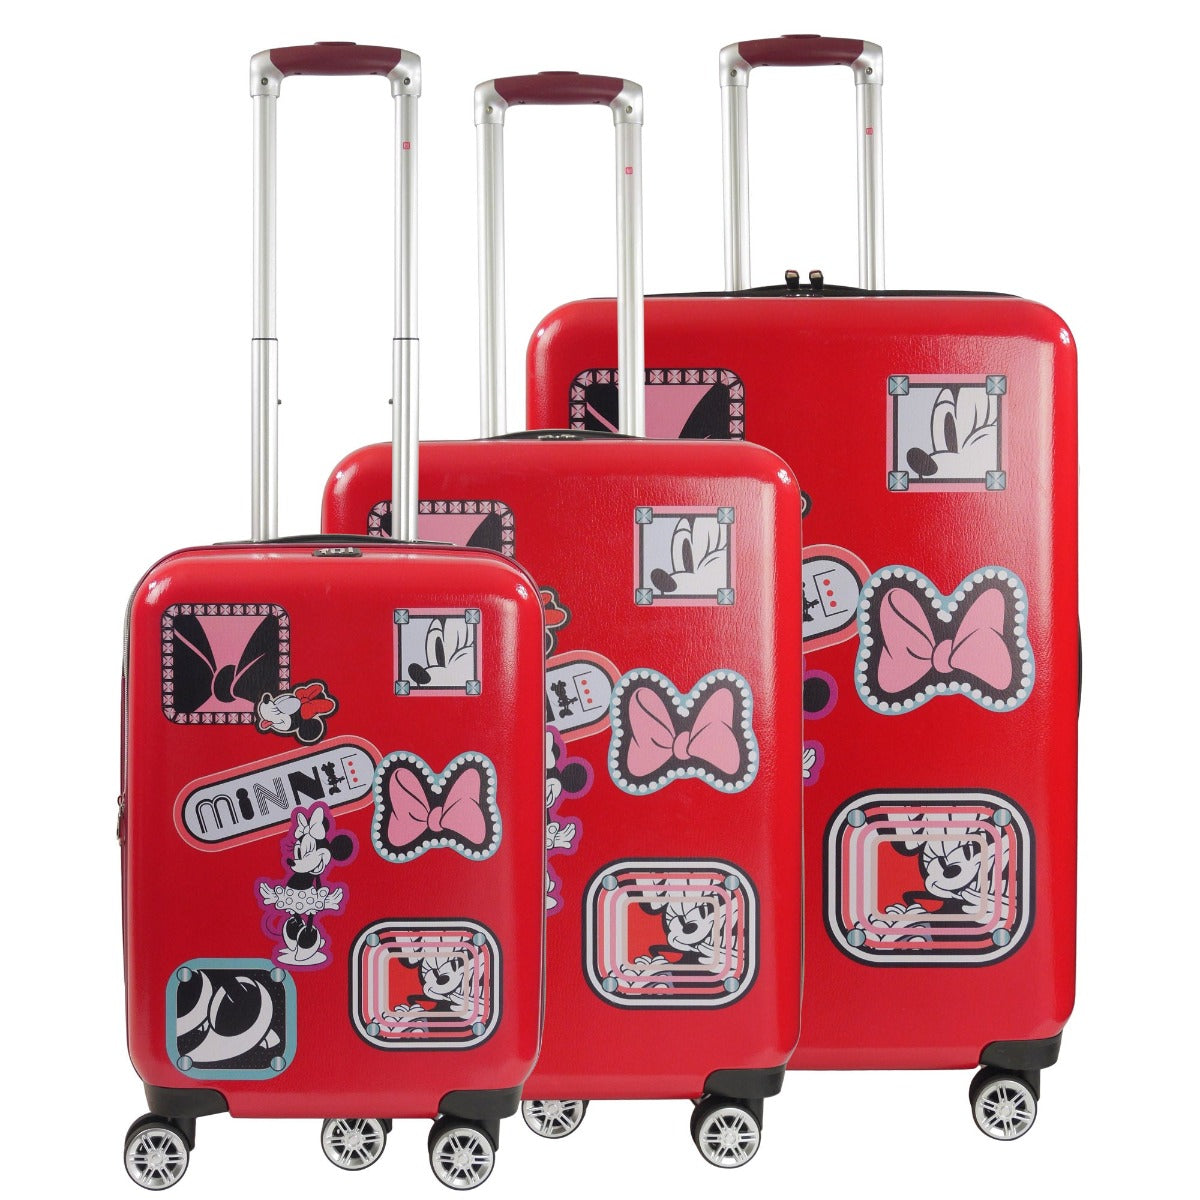 Disney Ful Minnie Mouse Travel Patch 3 piece expandable spinner suitcase 21" 25" 29" Fūl luggage set red